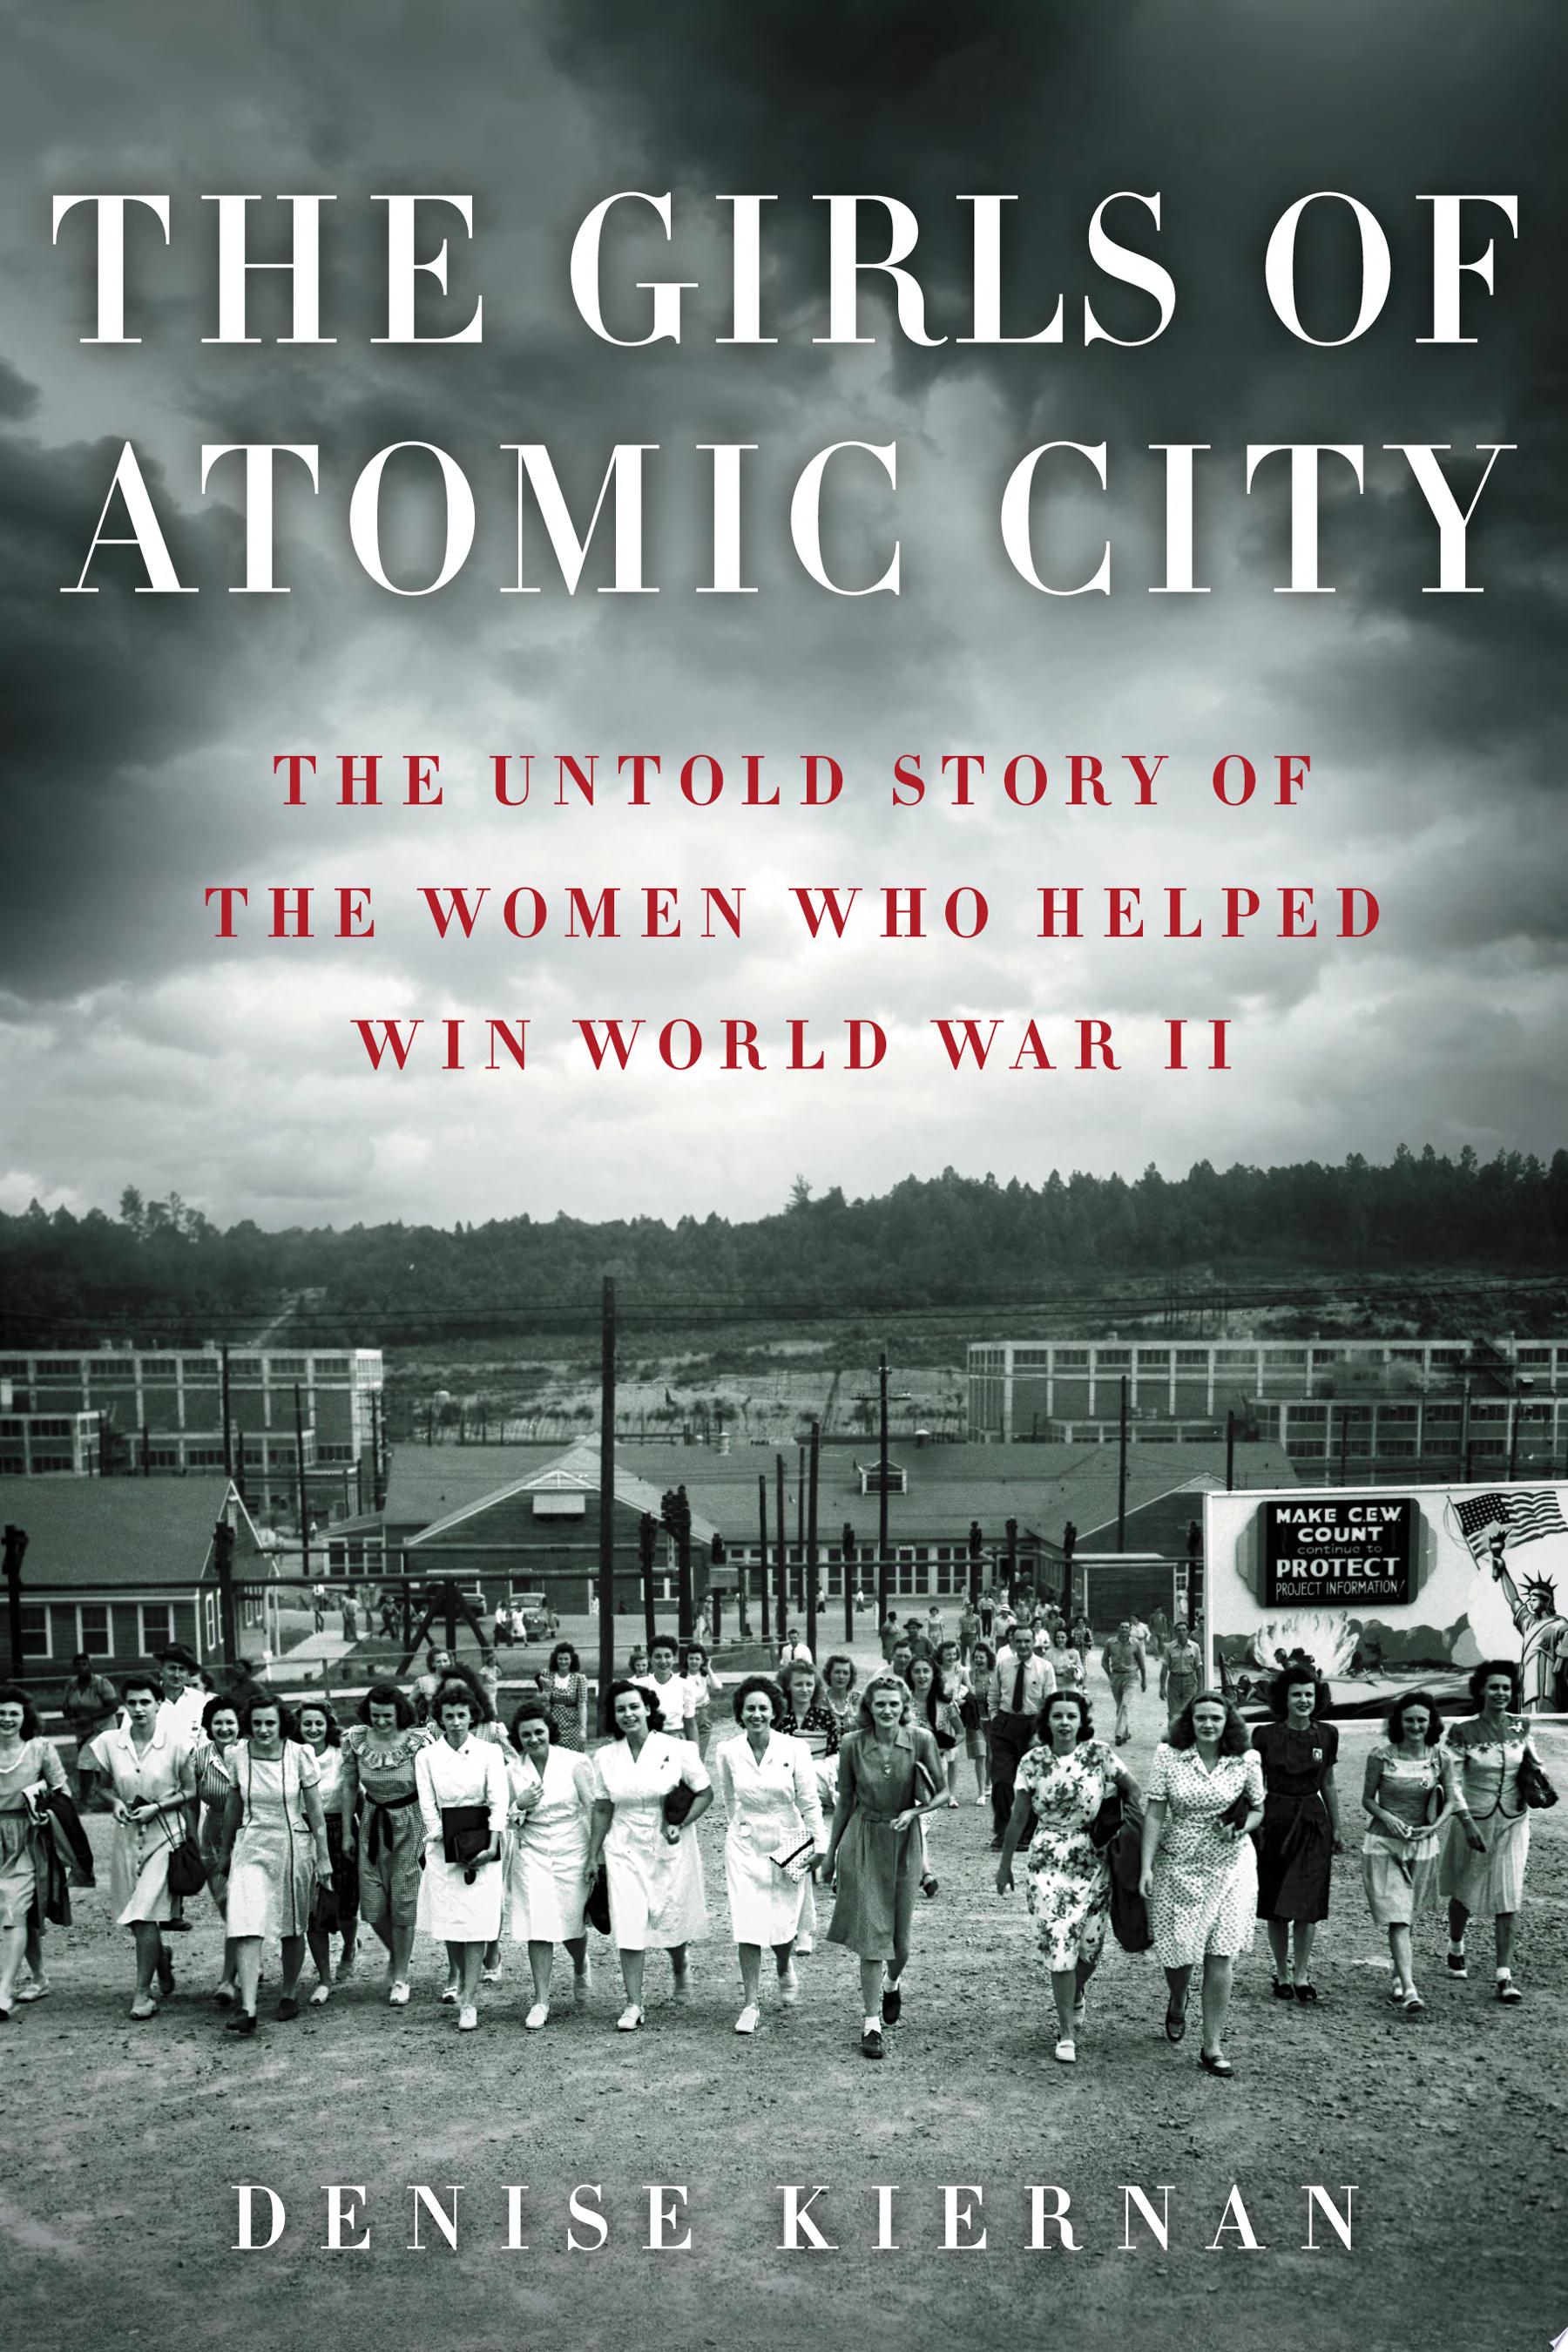 Image for "The Girls of Atomic City"